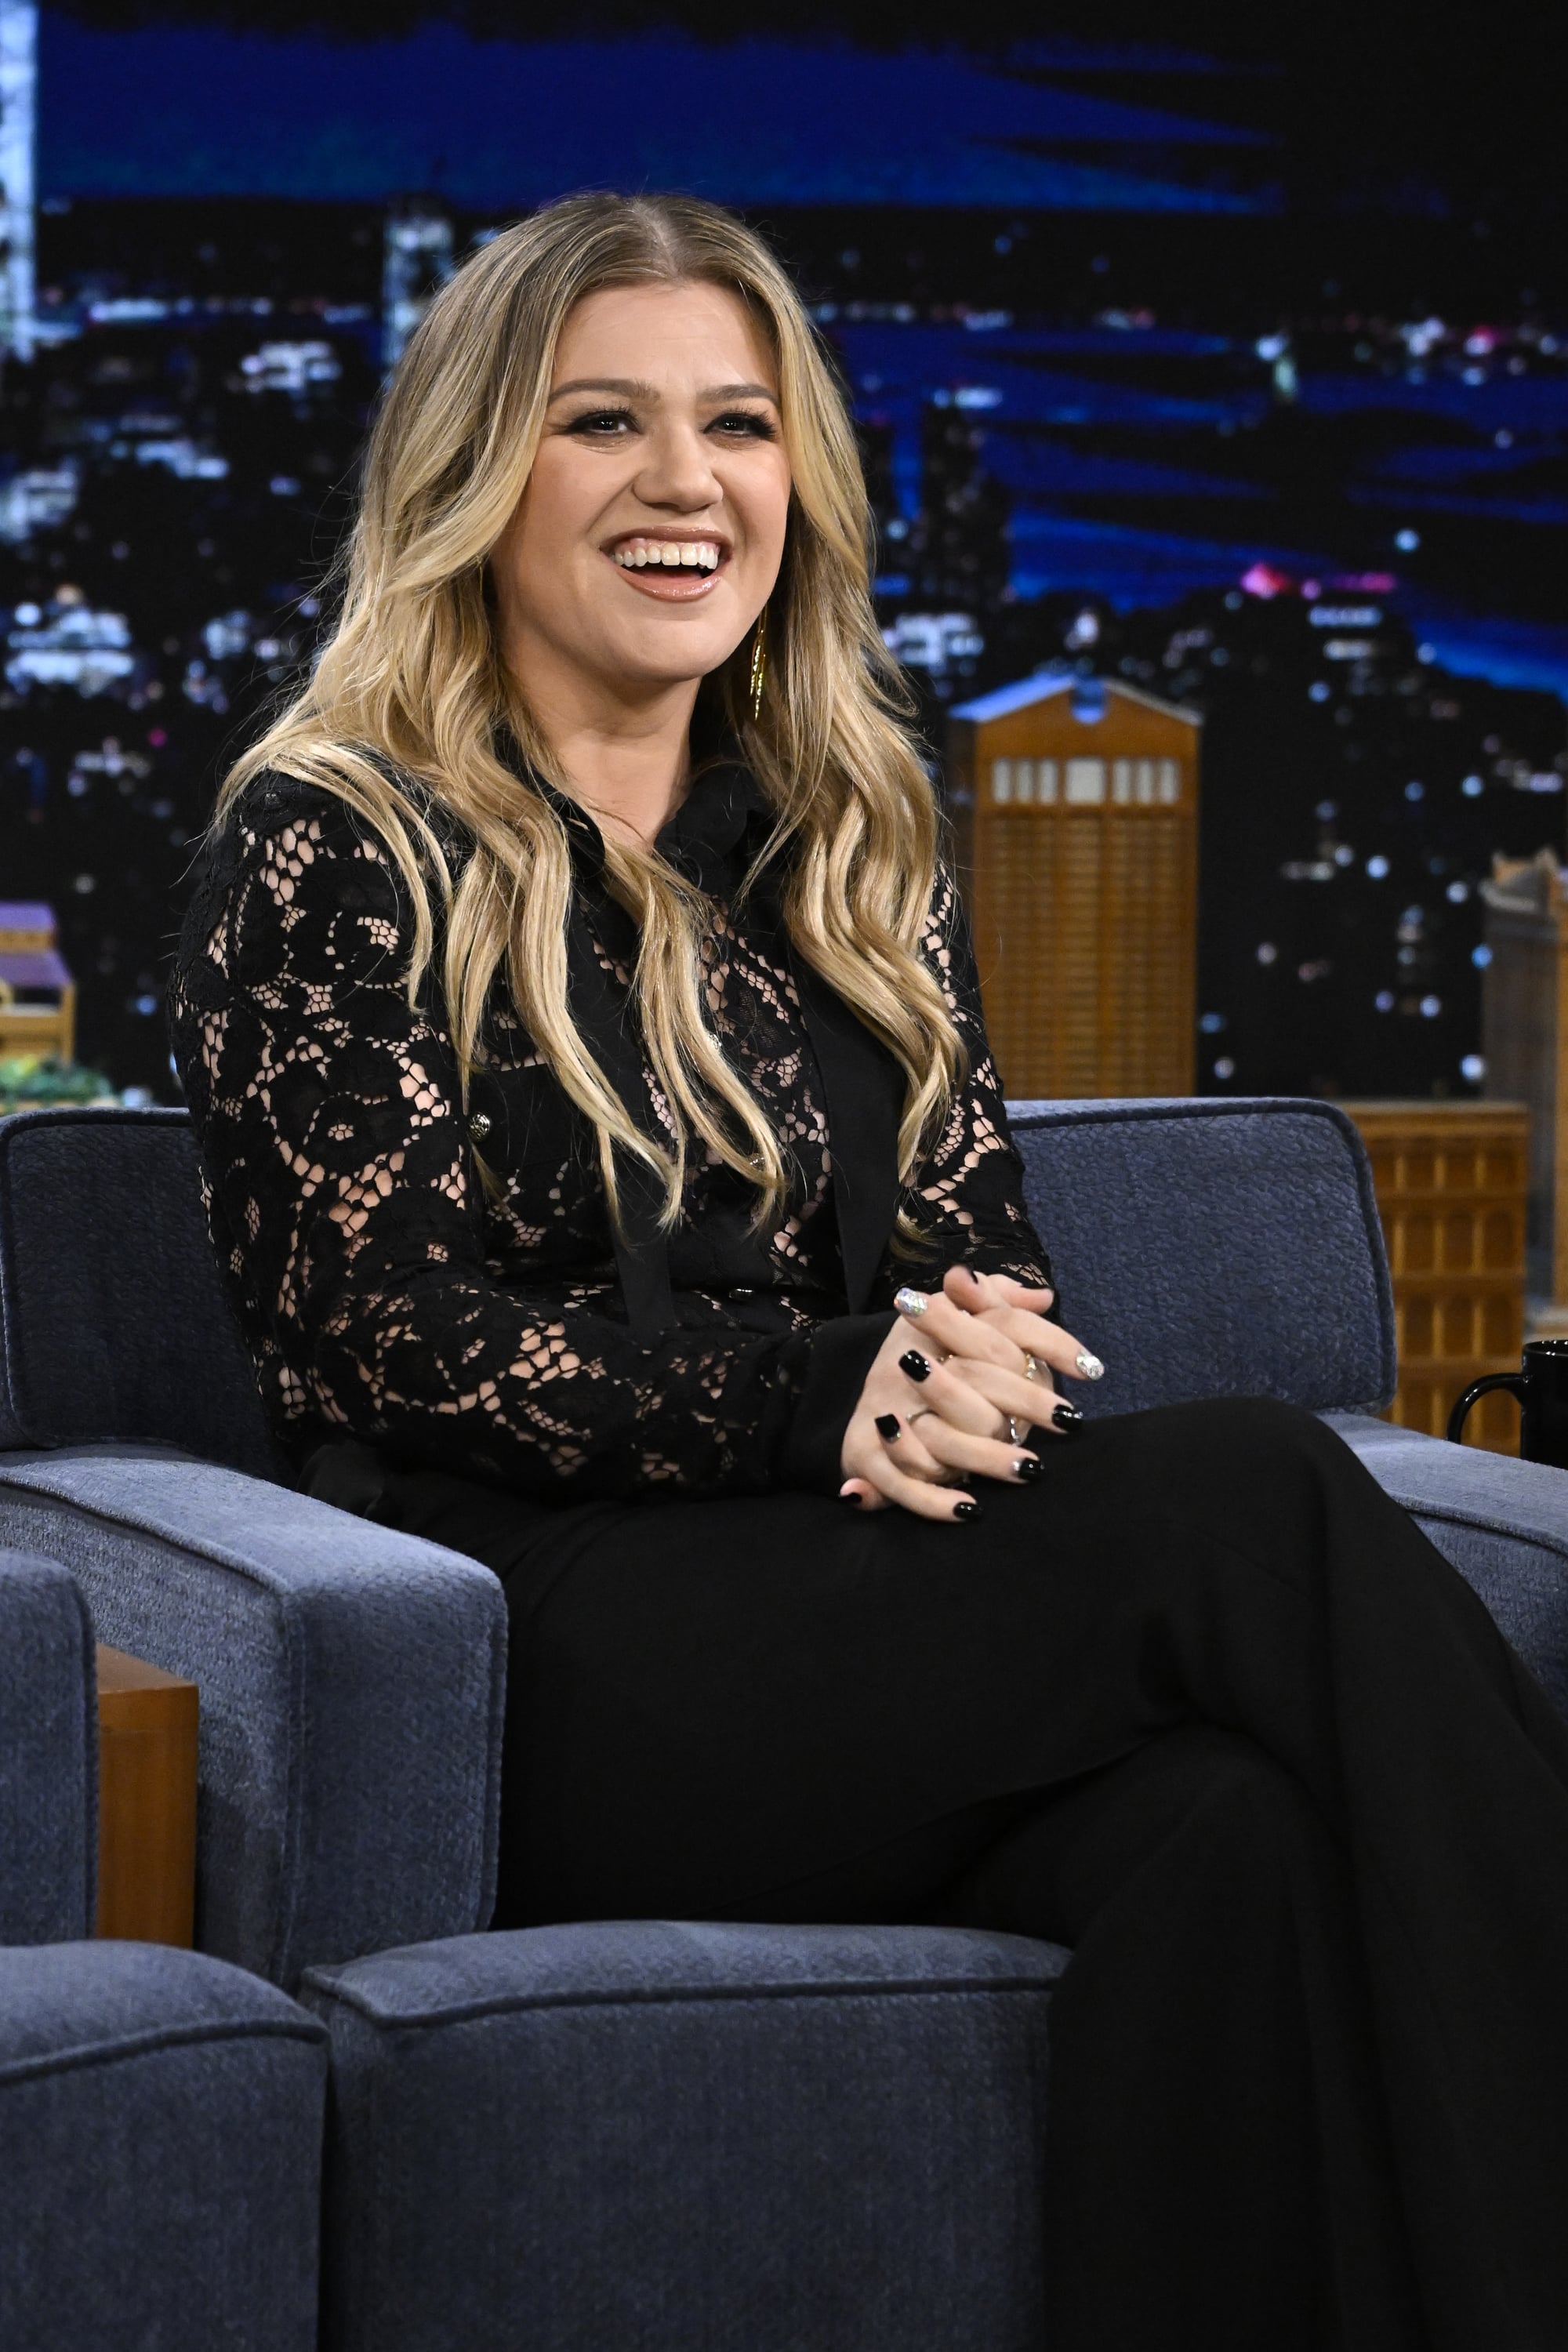 THE TONIGHT SHOW STARRING JIMMY FALLON -- Episode 1853 -- Pictured: Singer-songwriter & talk-show host Kelly Clarkson during an interview on Friday, October 13, 2023 -- (Photo by: Todd Owyoung/NBC via Getty Images)